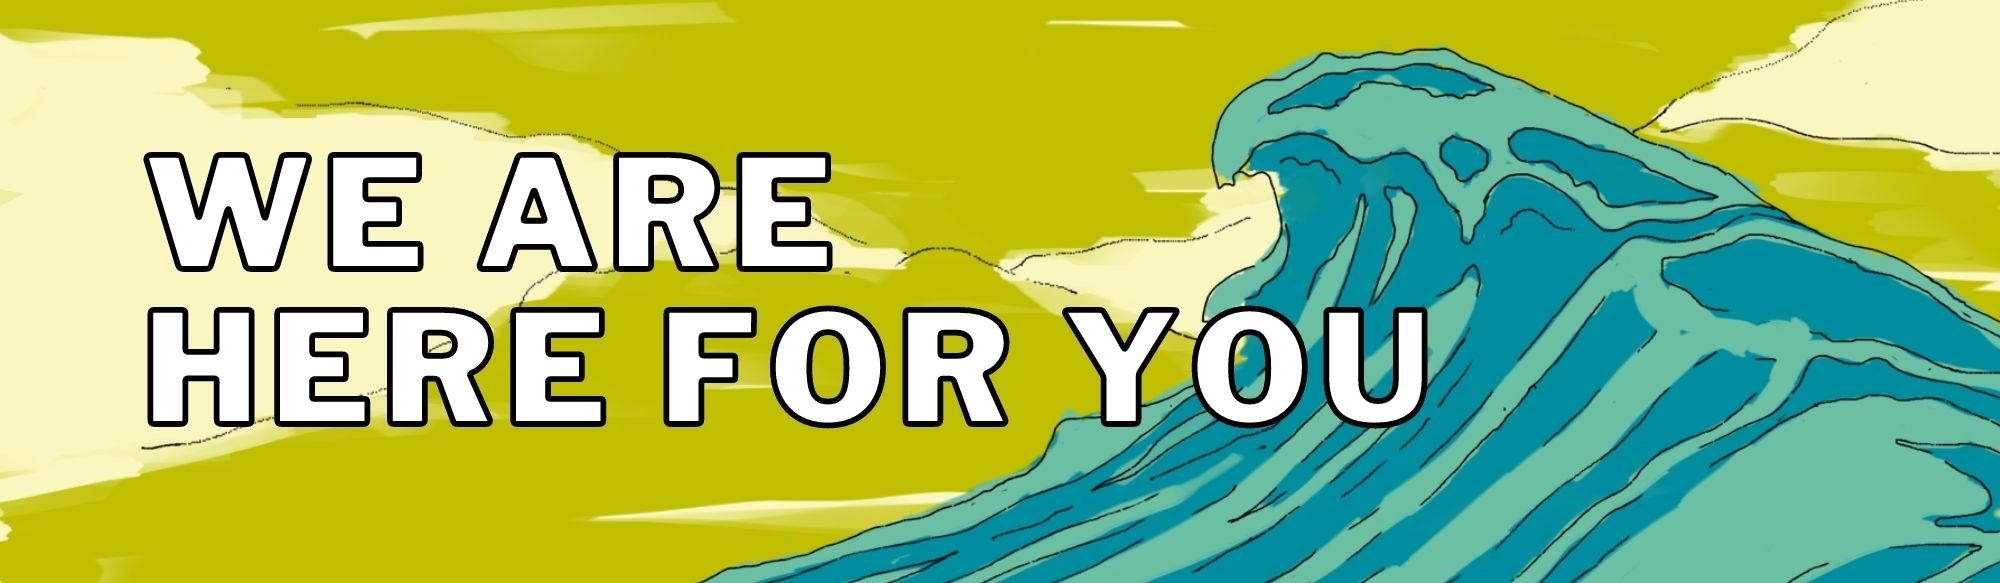 A graphic with the text "we are here for you" on top of a green background with a large blue wave.